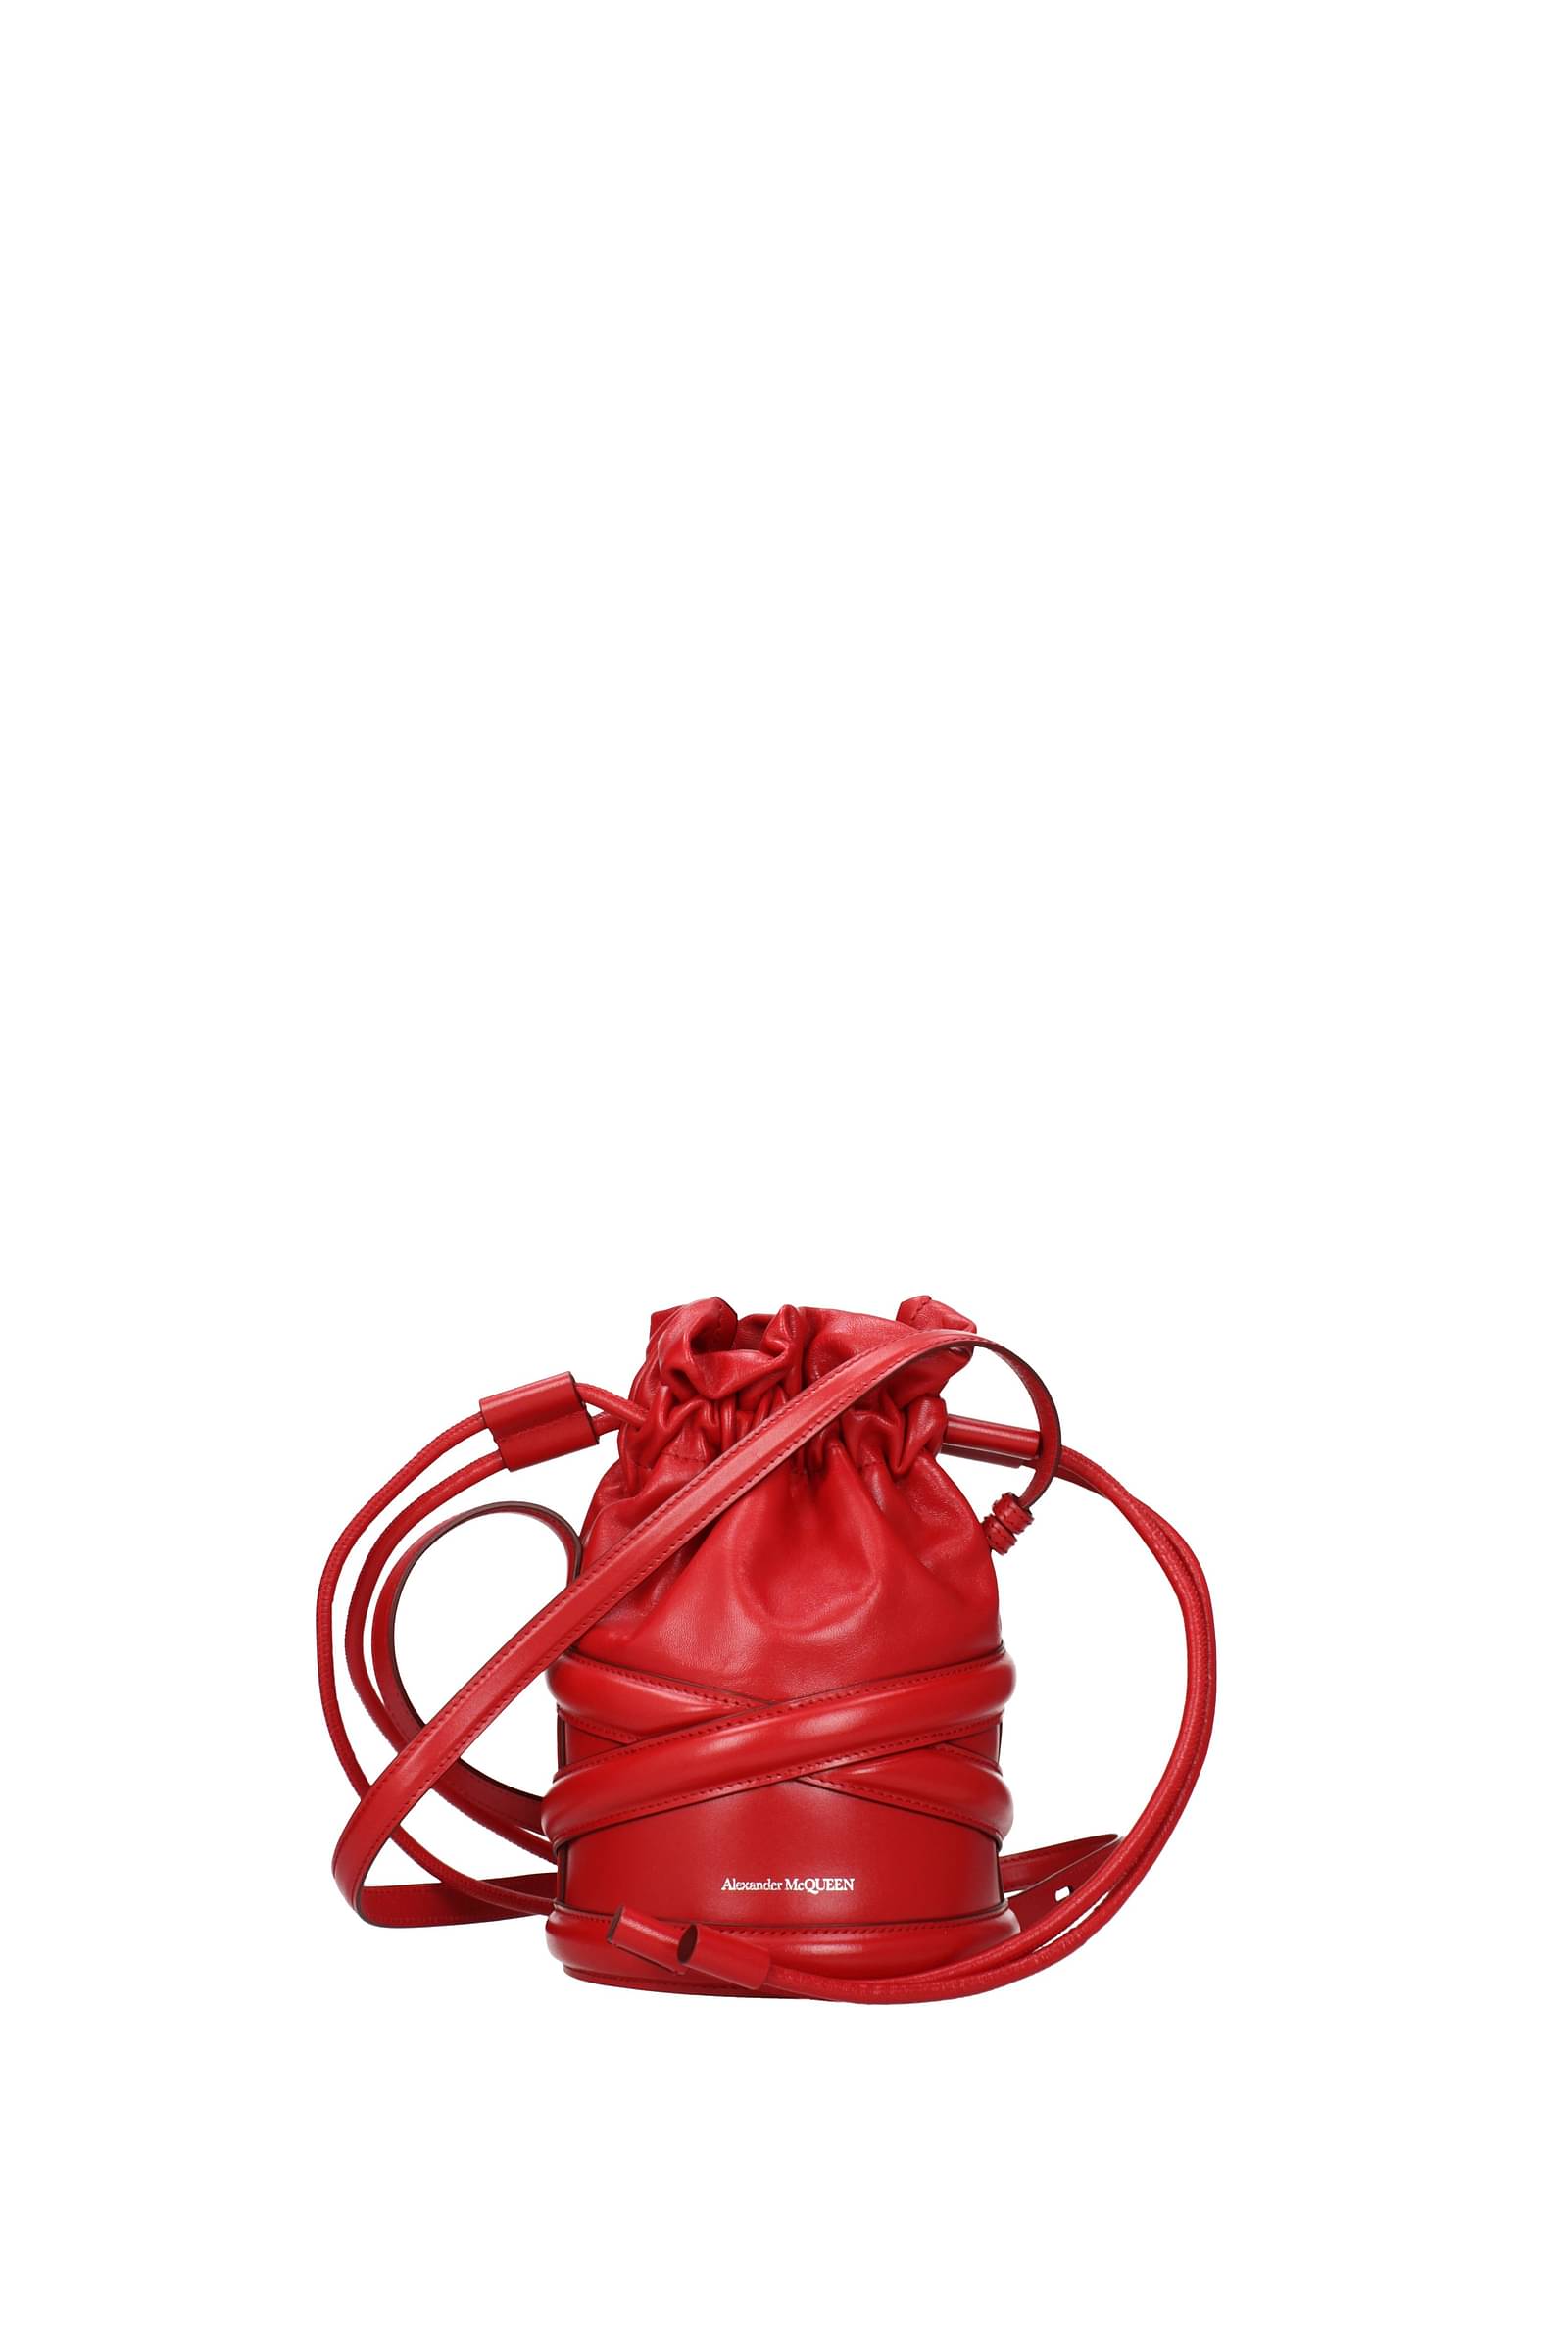 Alexander McQueen Small De Manta Tote in Red Goatskin and Glossy Python -  SOLD